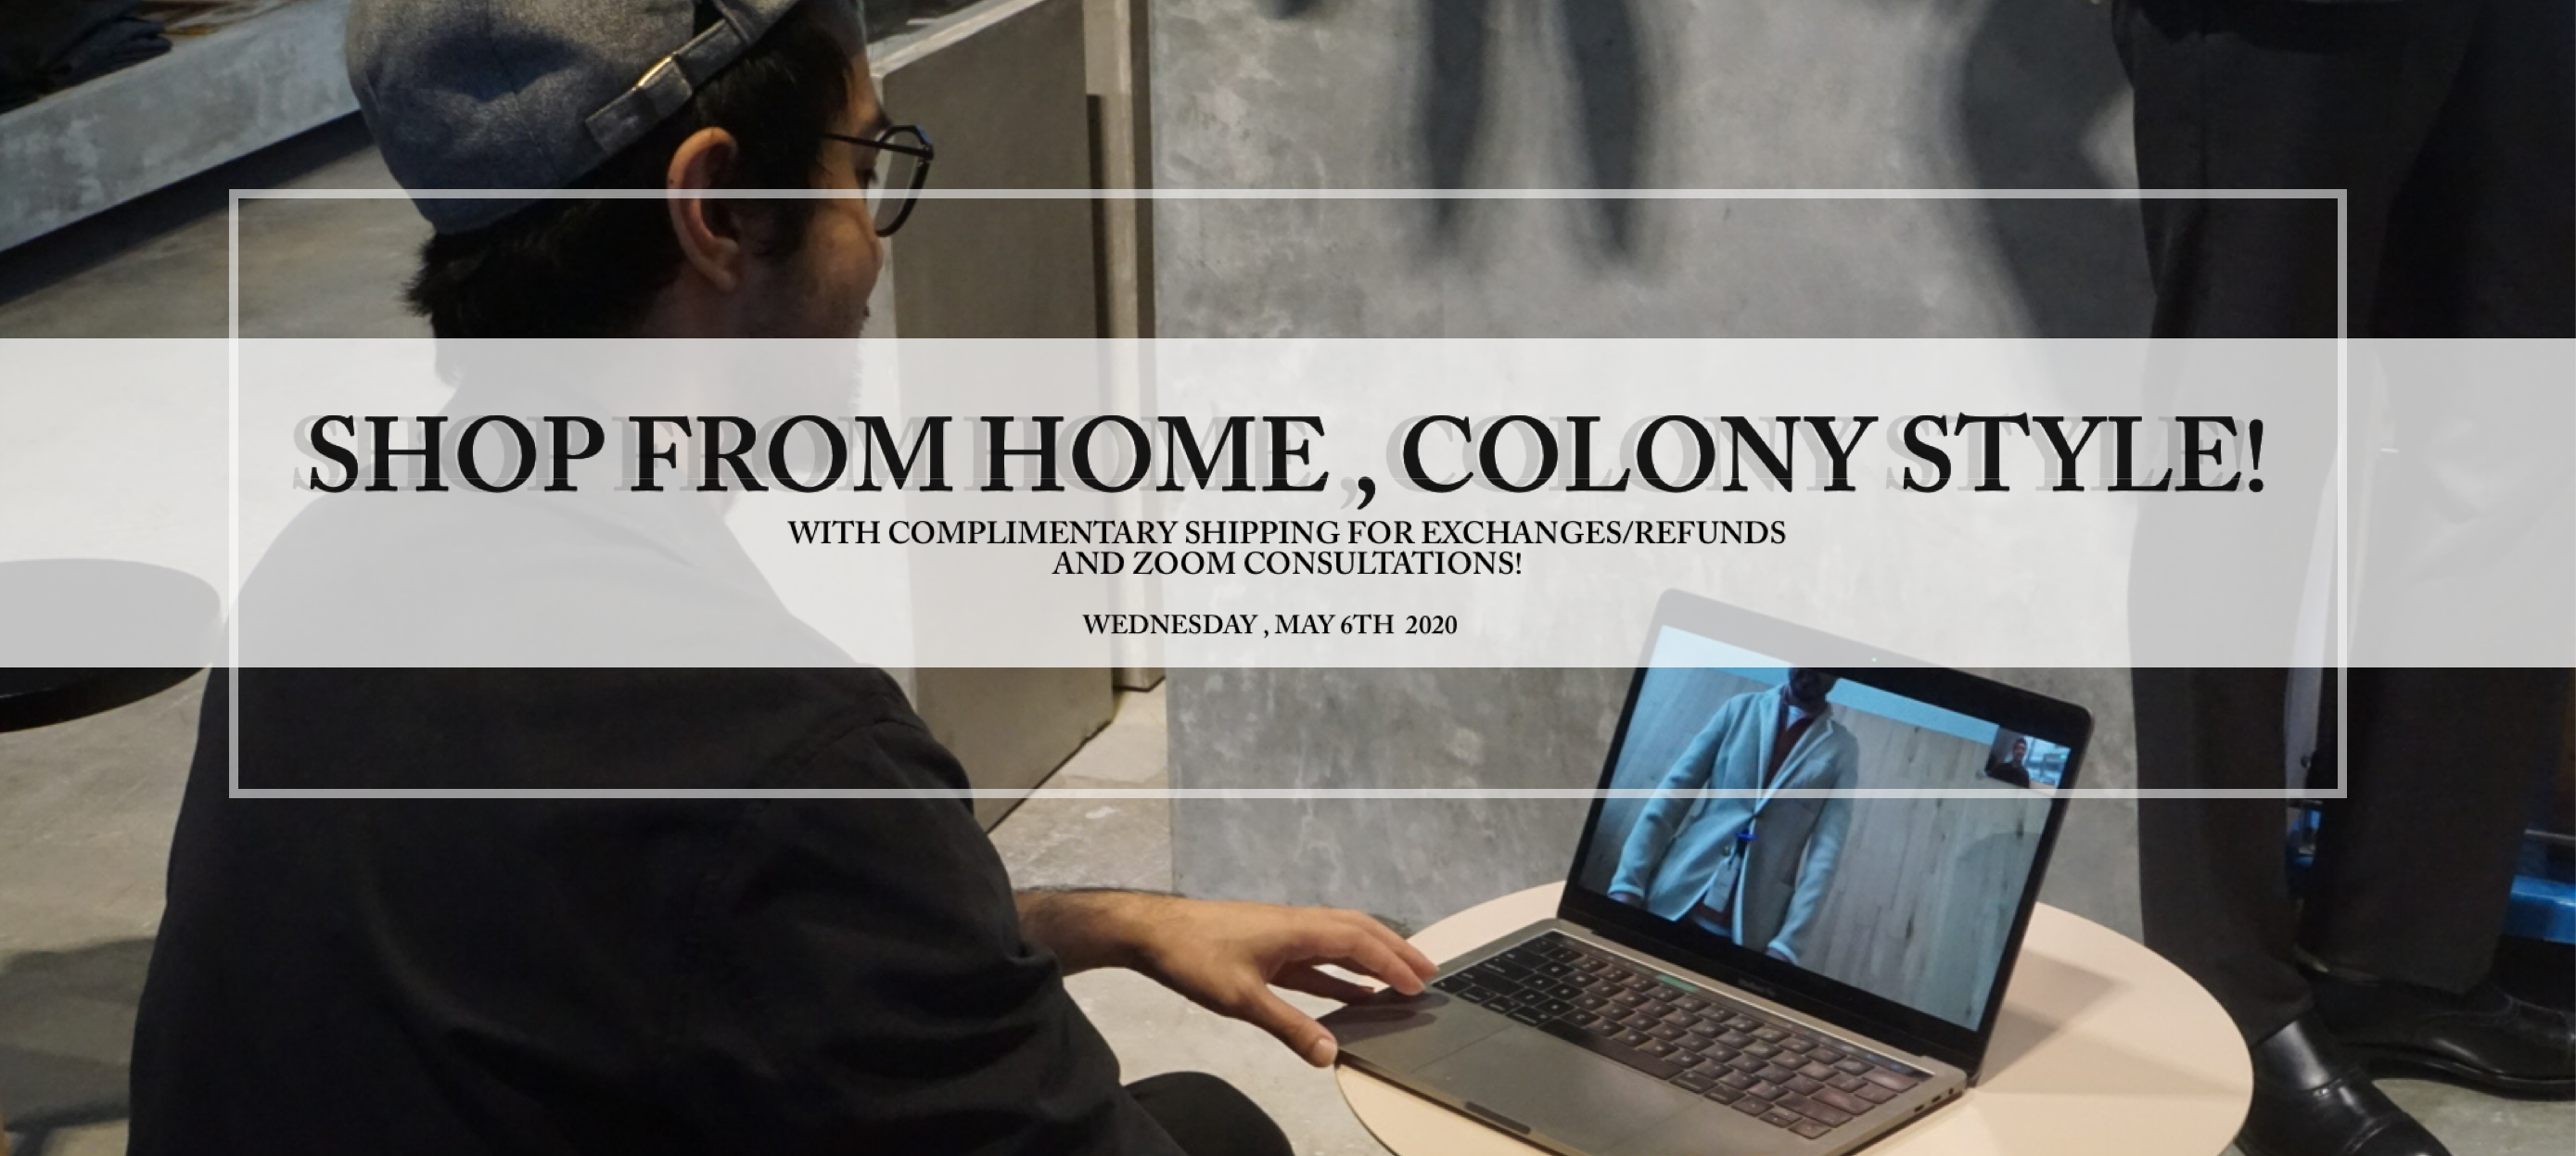 Colony Clothing Home Shopping Experience